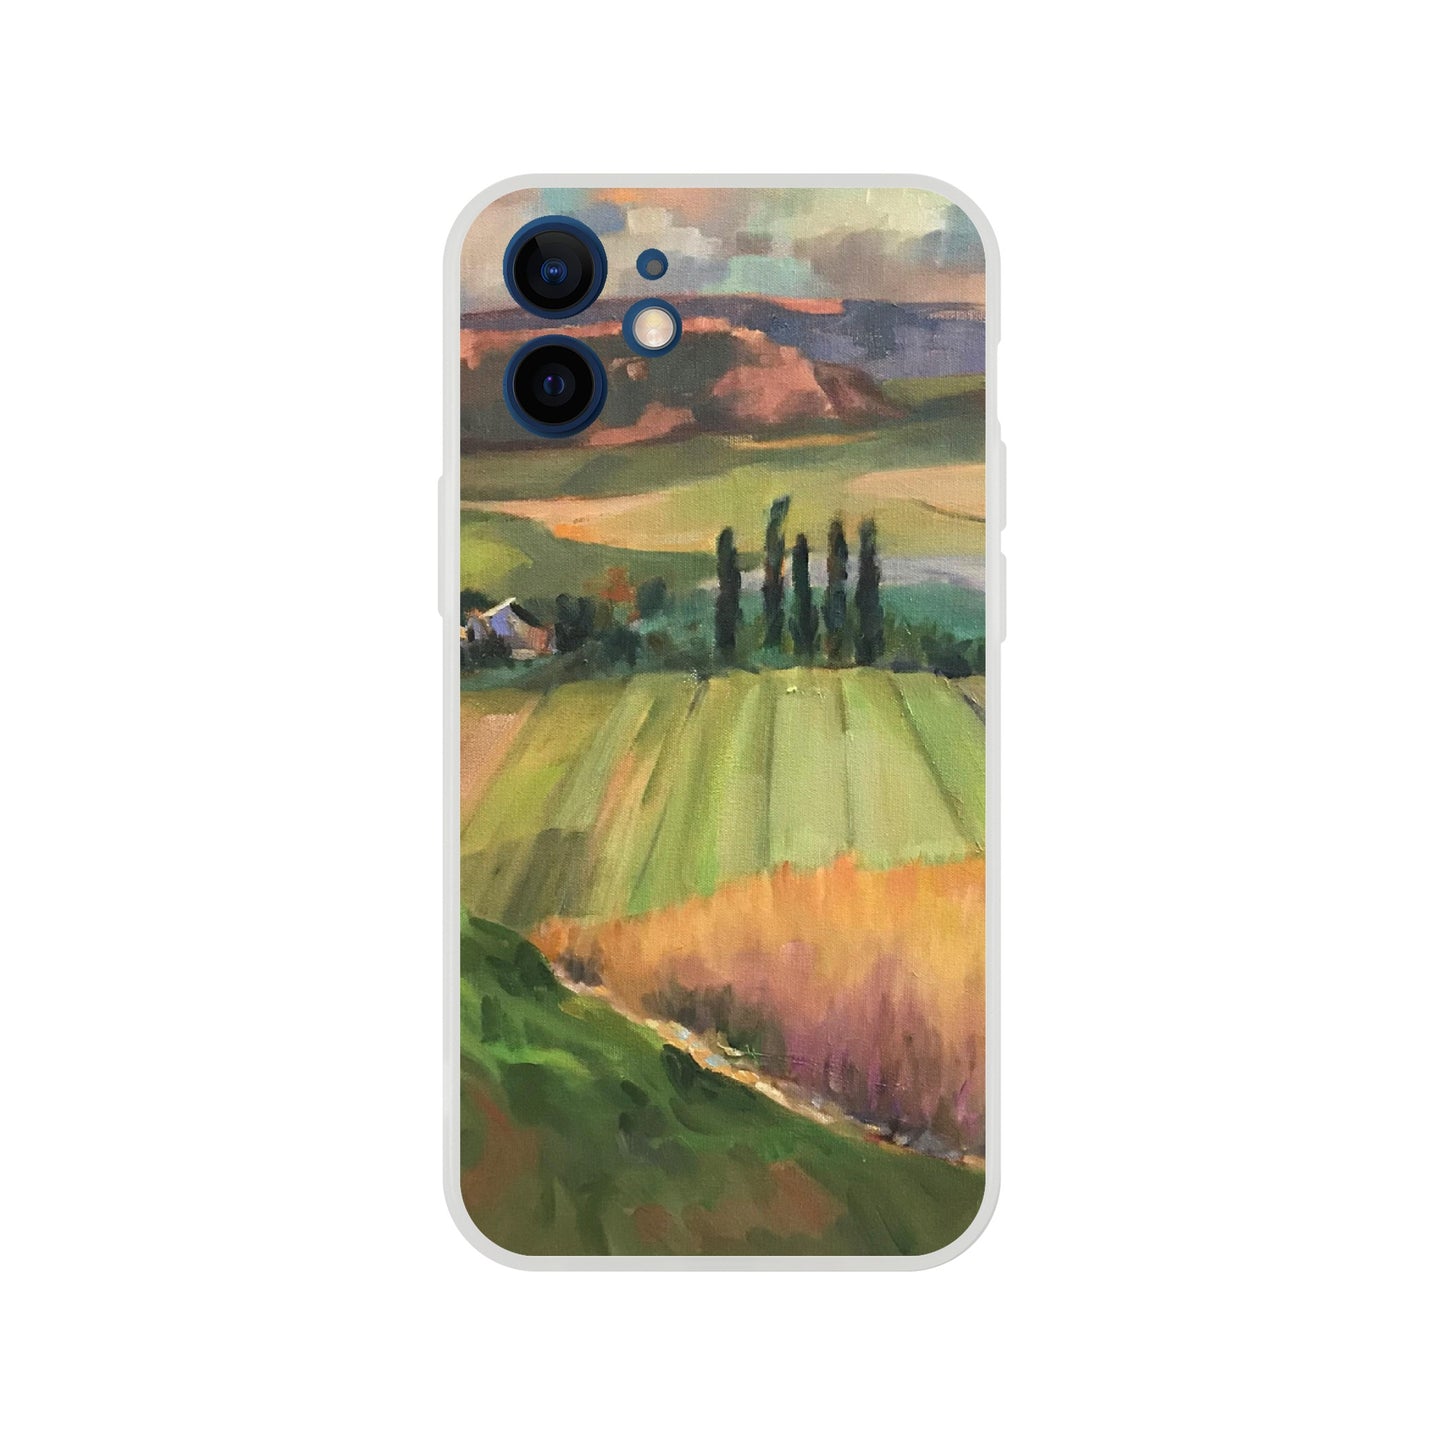 "Pastoral Landscape" Flexi Phone Case for Iphone or Samsung by Barbara Cleary Designs